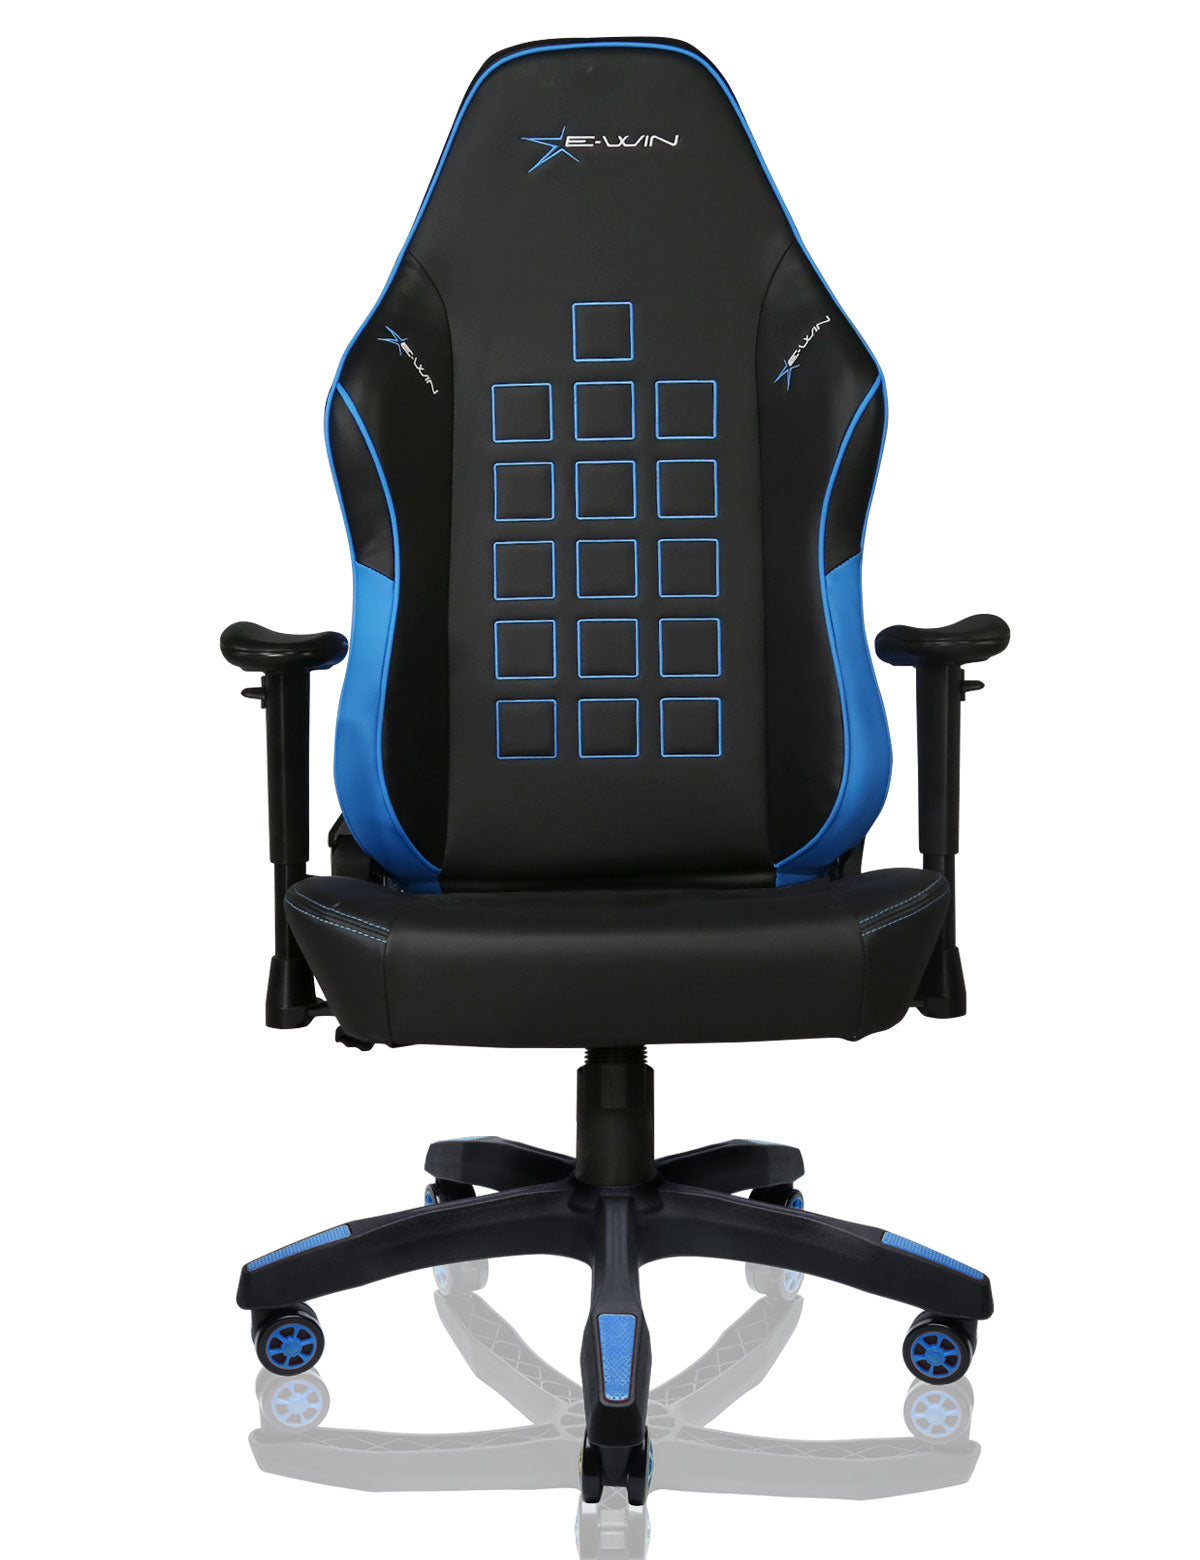 E-WIN Knight Series Ergonomic Computer Gaming Office Chair with Pillows - KTD